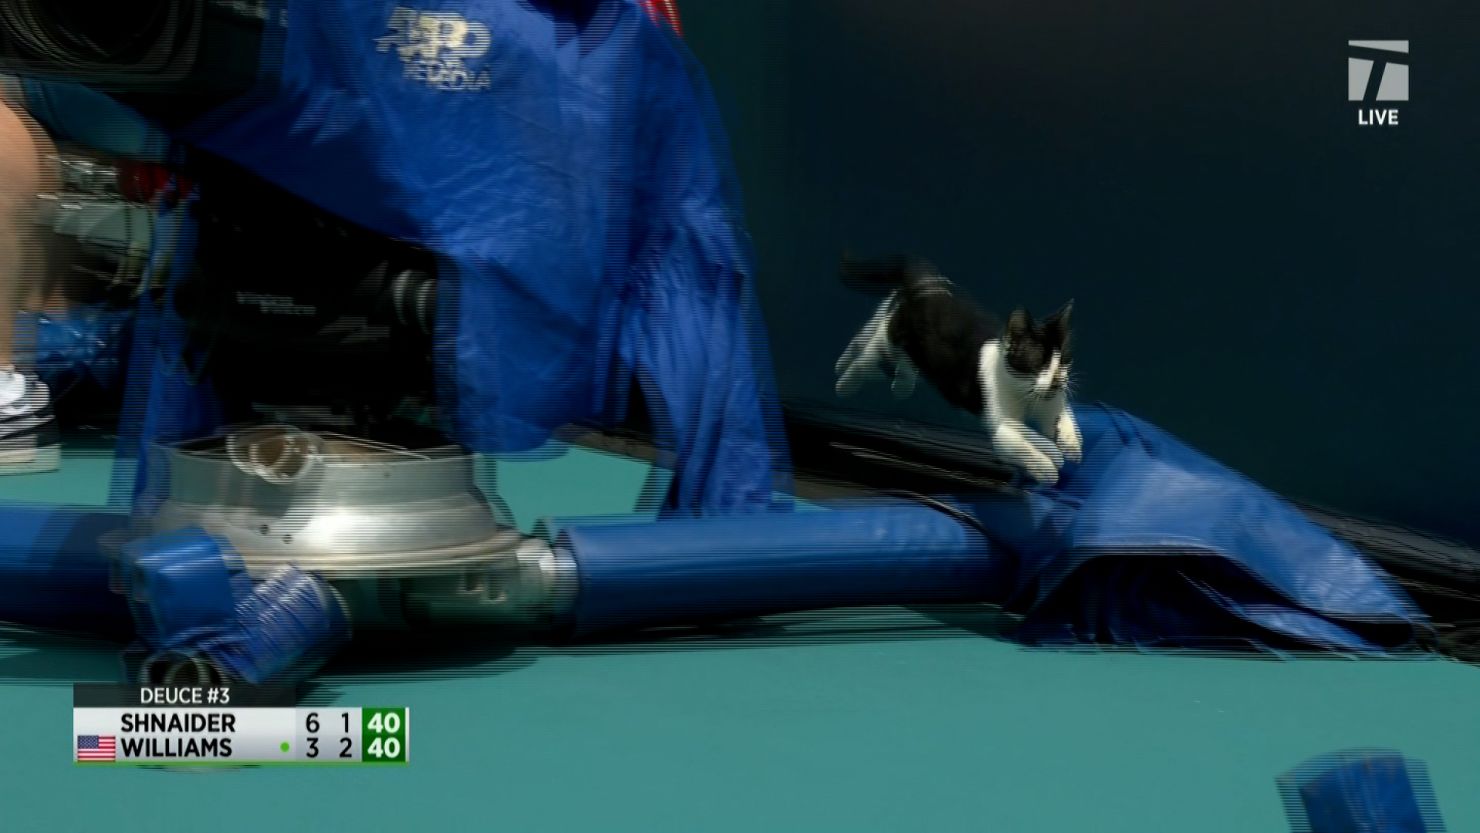 A feline court invader interrupted the match between Venus Williams and Diana Shnaider.